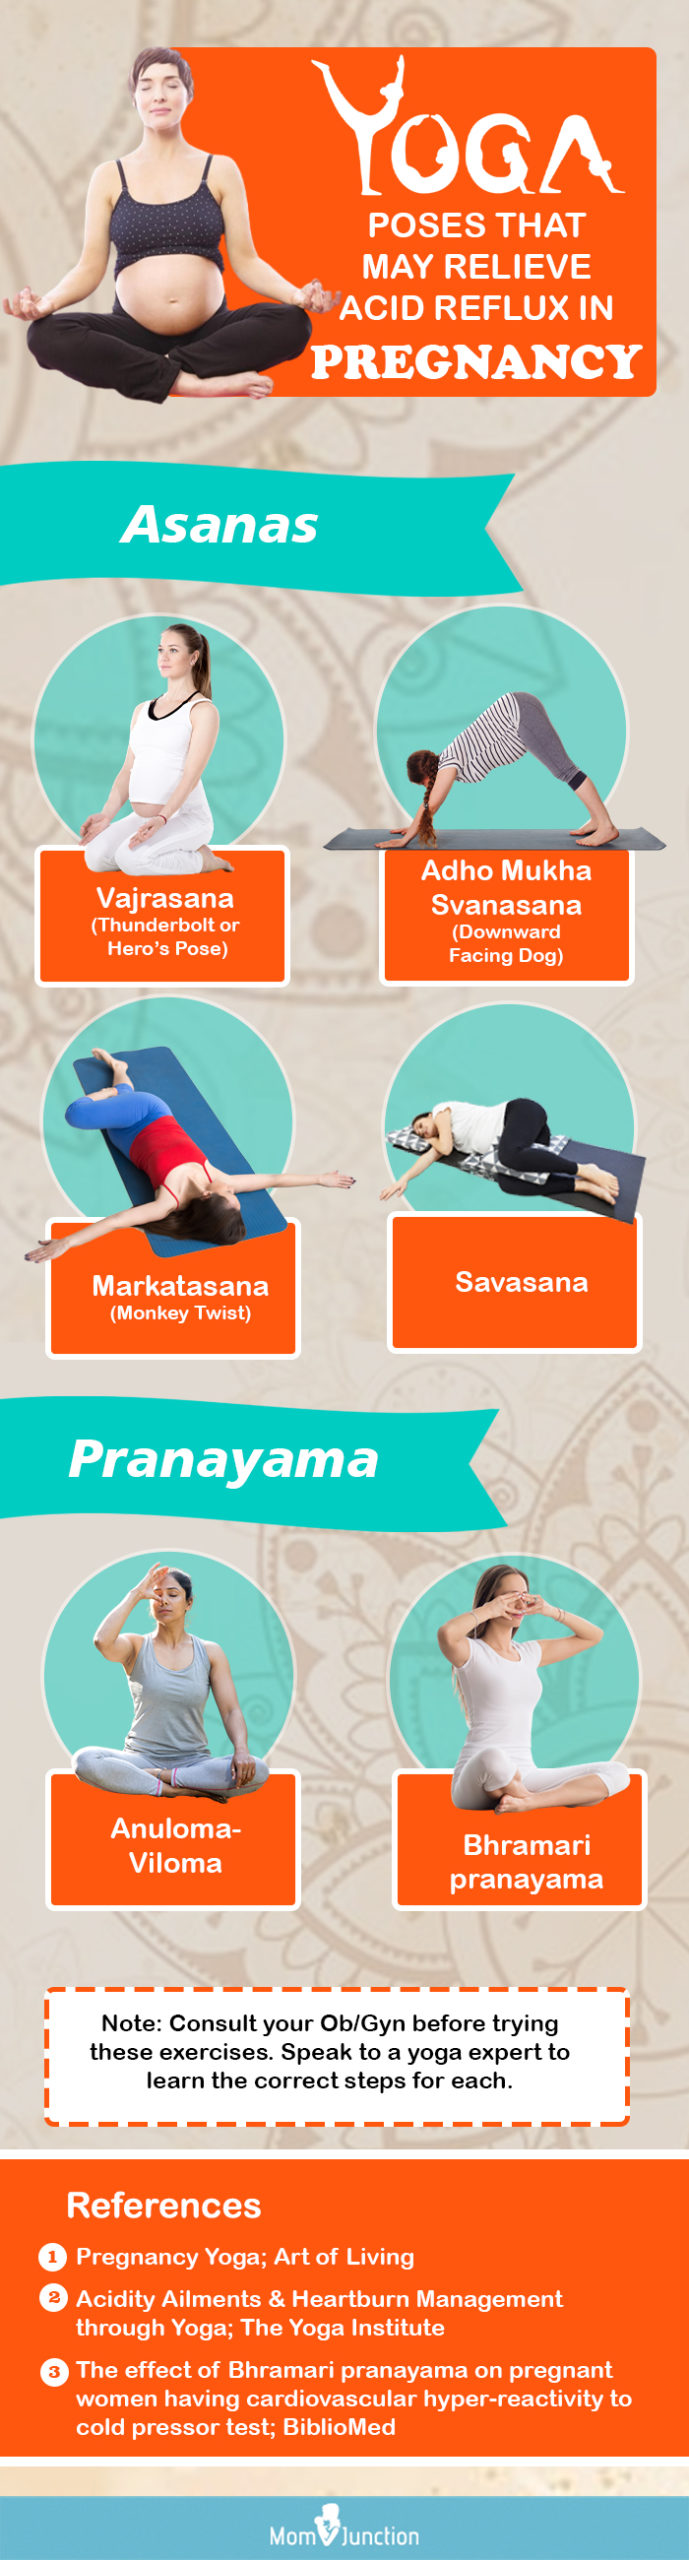 yoga poses for acid reflux in pregnancy (infographic)